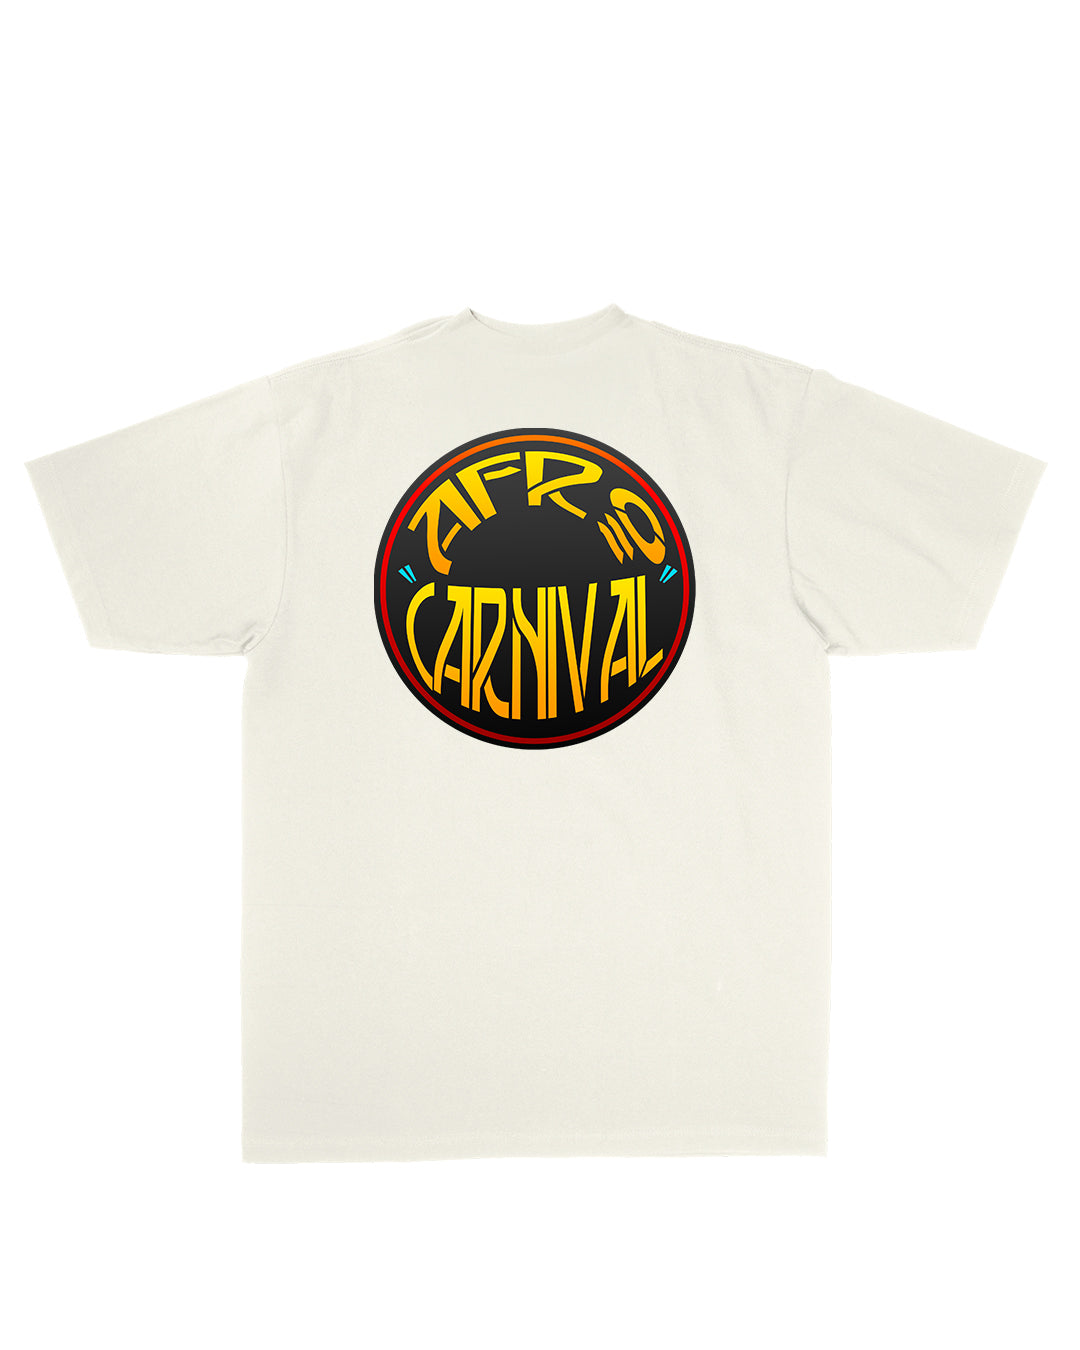 AFRO CARNIVAL T-SHIRT — off white